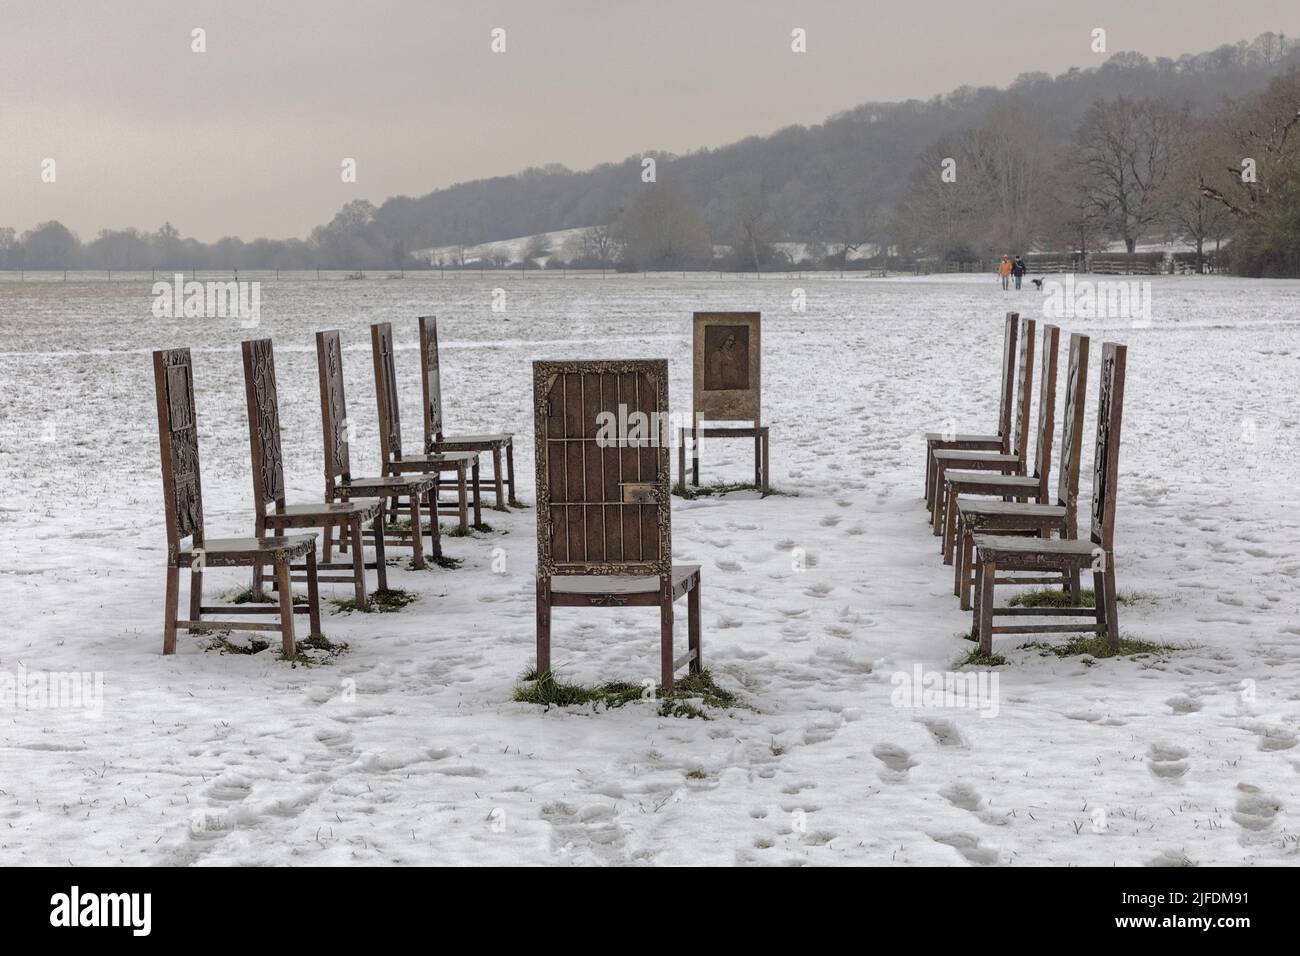 Chairs of The Jurors Public Art installation in snow at Runnymede where Magna Carta was sealed Stock Photo